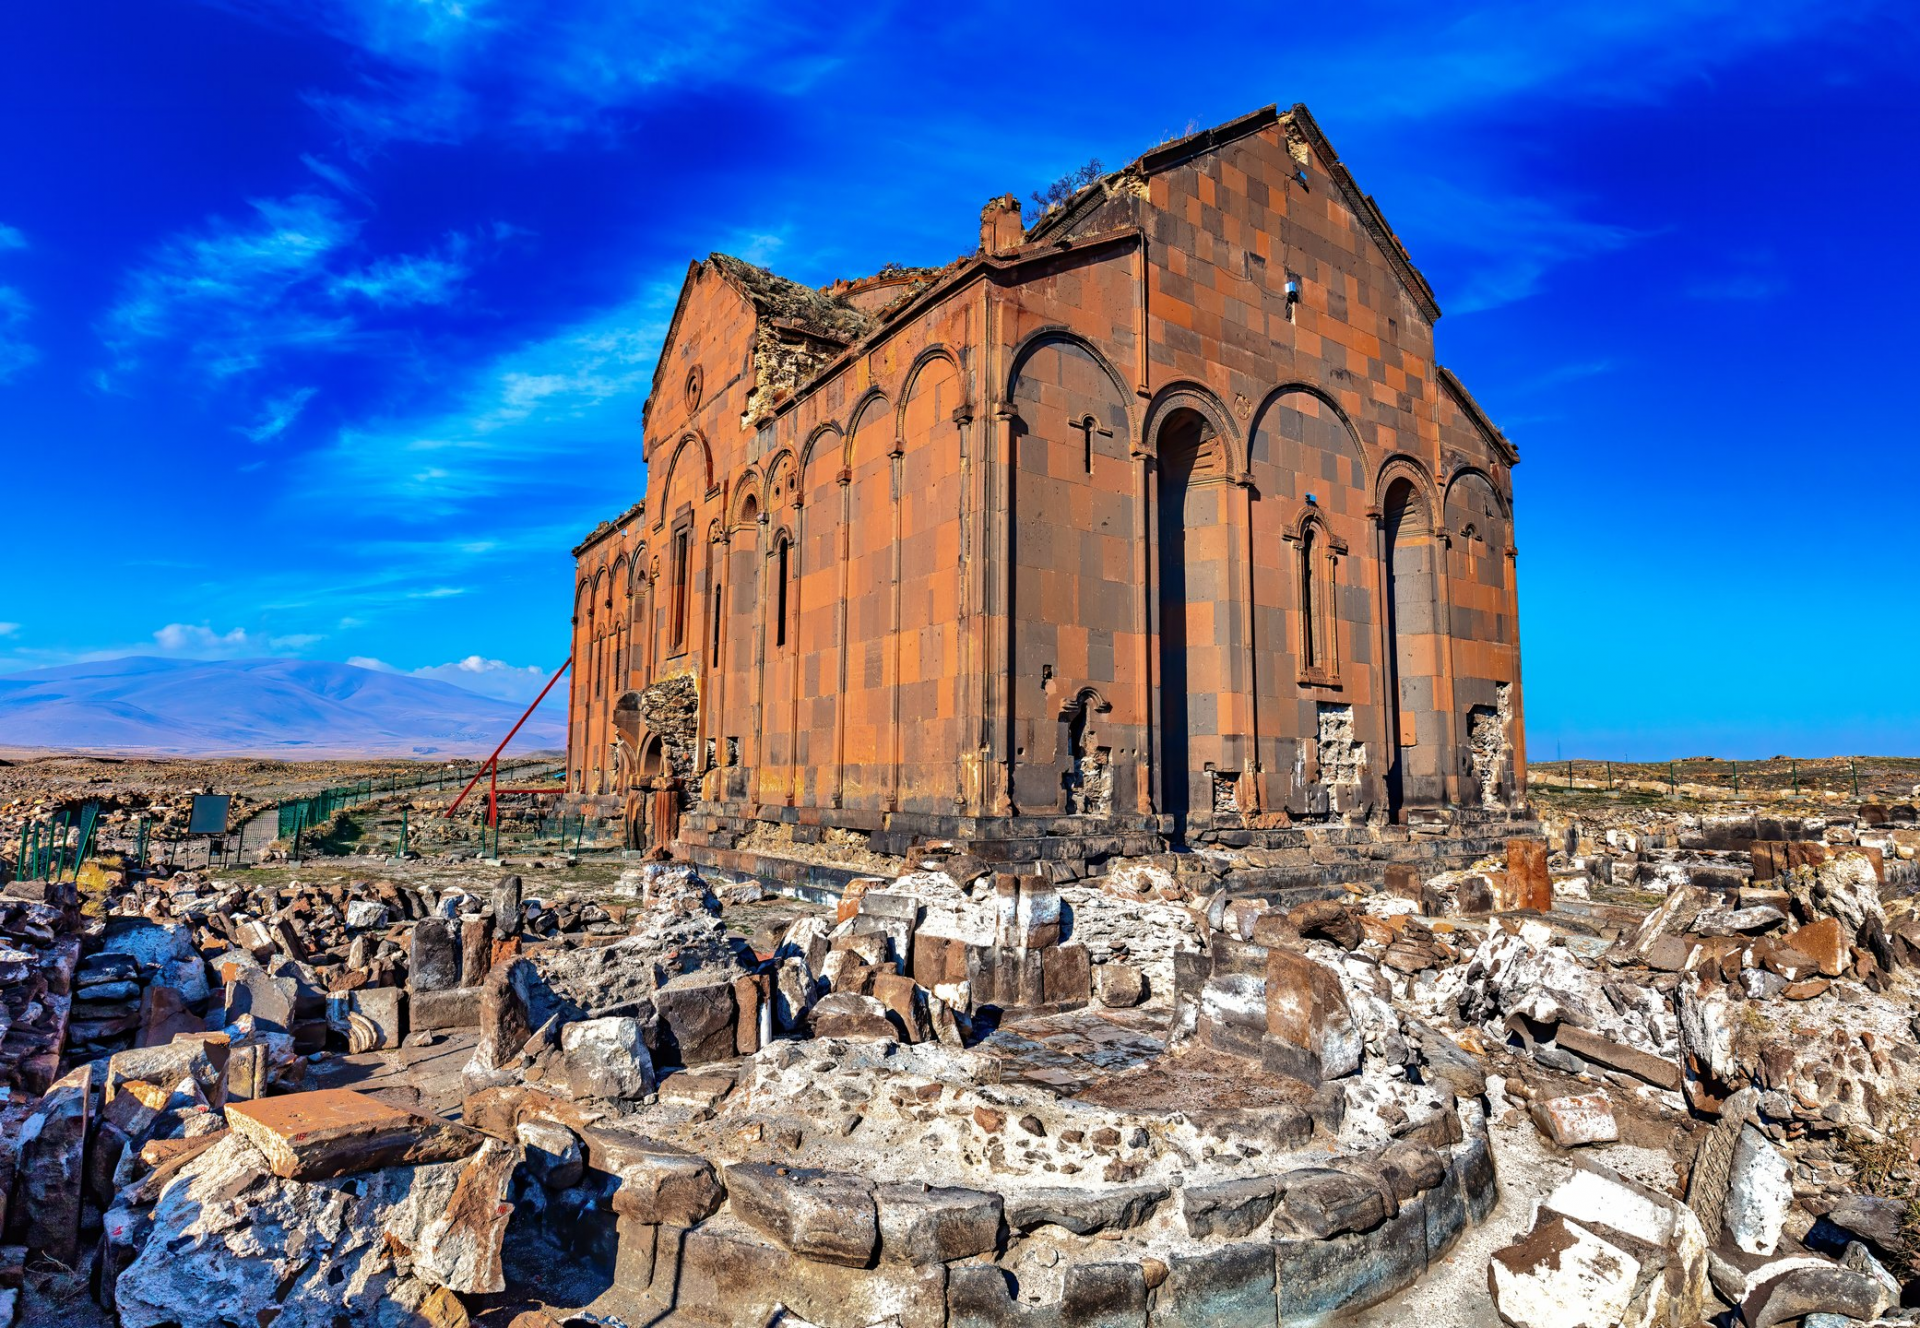 The ruins of the Cathedral of Ani are seen on the Turkish-Armenian border. (iStock Photo)